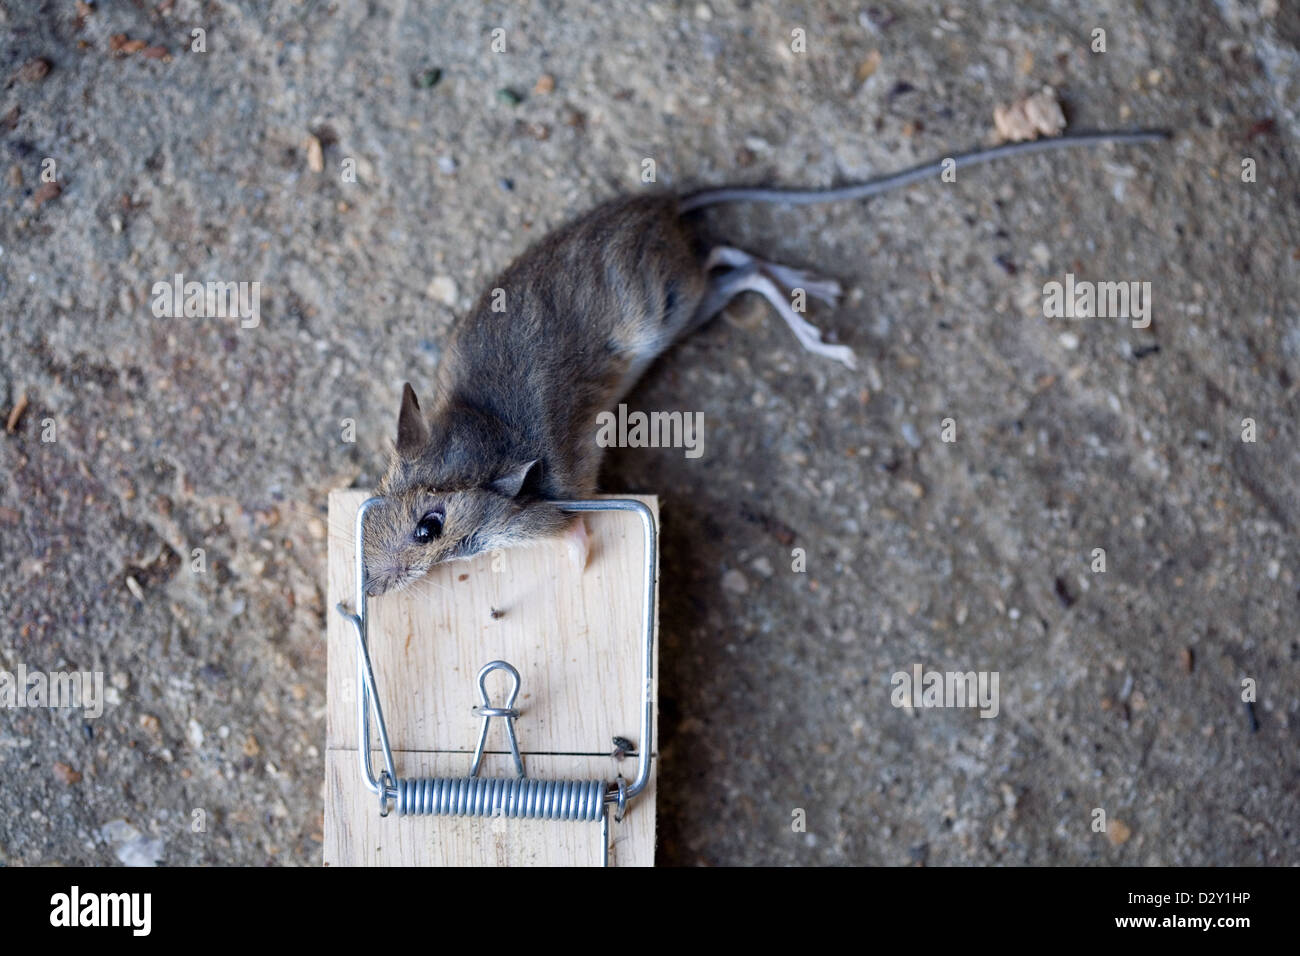 https://c8.alamy.com/comp/D2Y1HP/a-common-house-mouse-mus-musculus-lying-dead-in-a-traditional-wooden-D2Y1HP.jpg